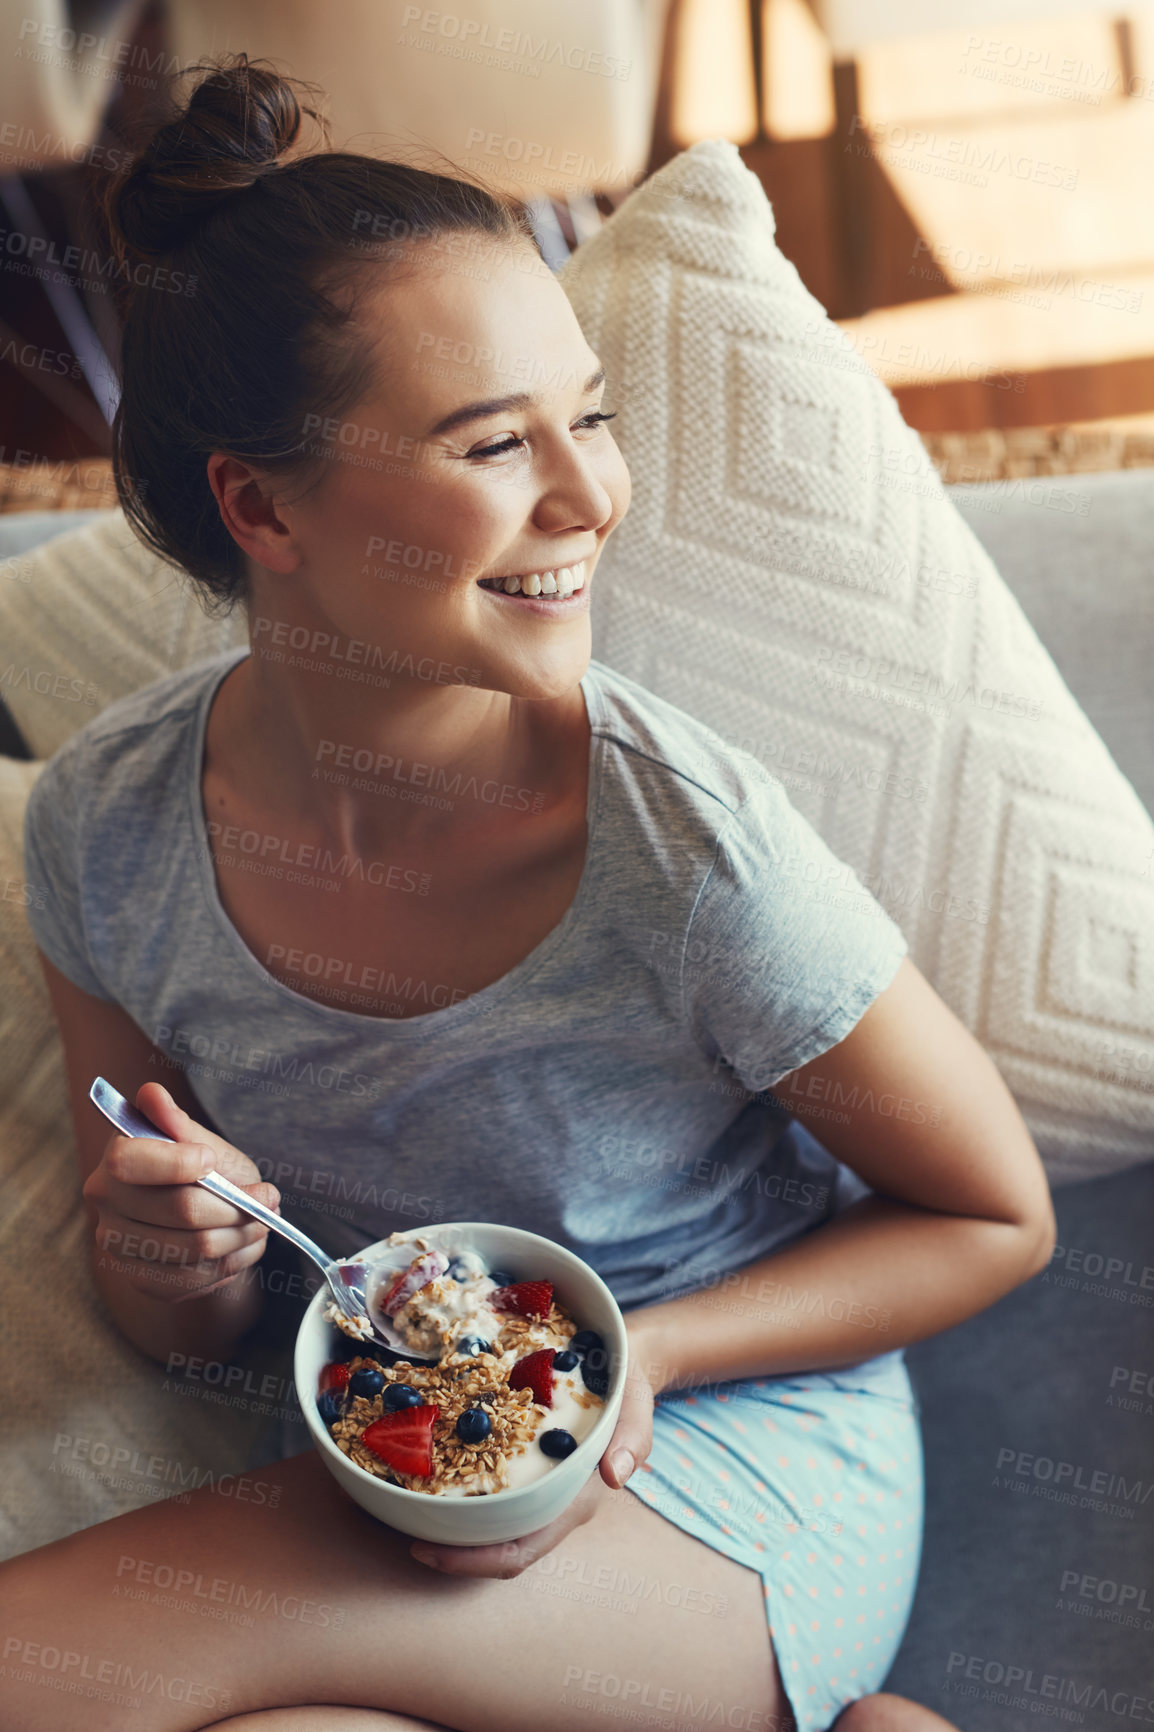 Buy stock photo Shot of an attractive young woman eating her breakfast while relaxing on the sofa at home